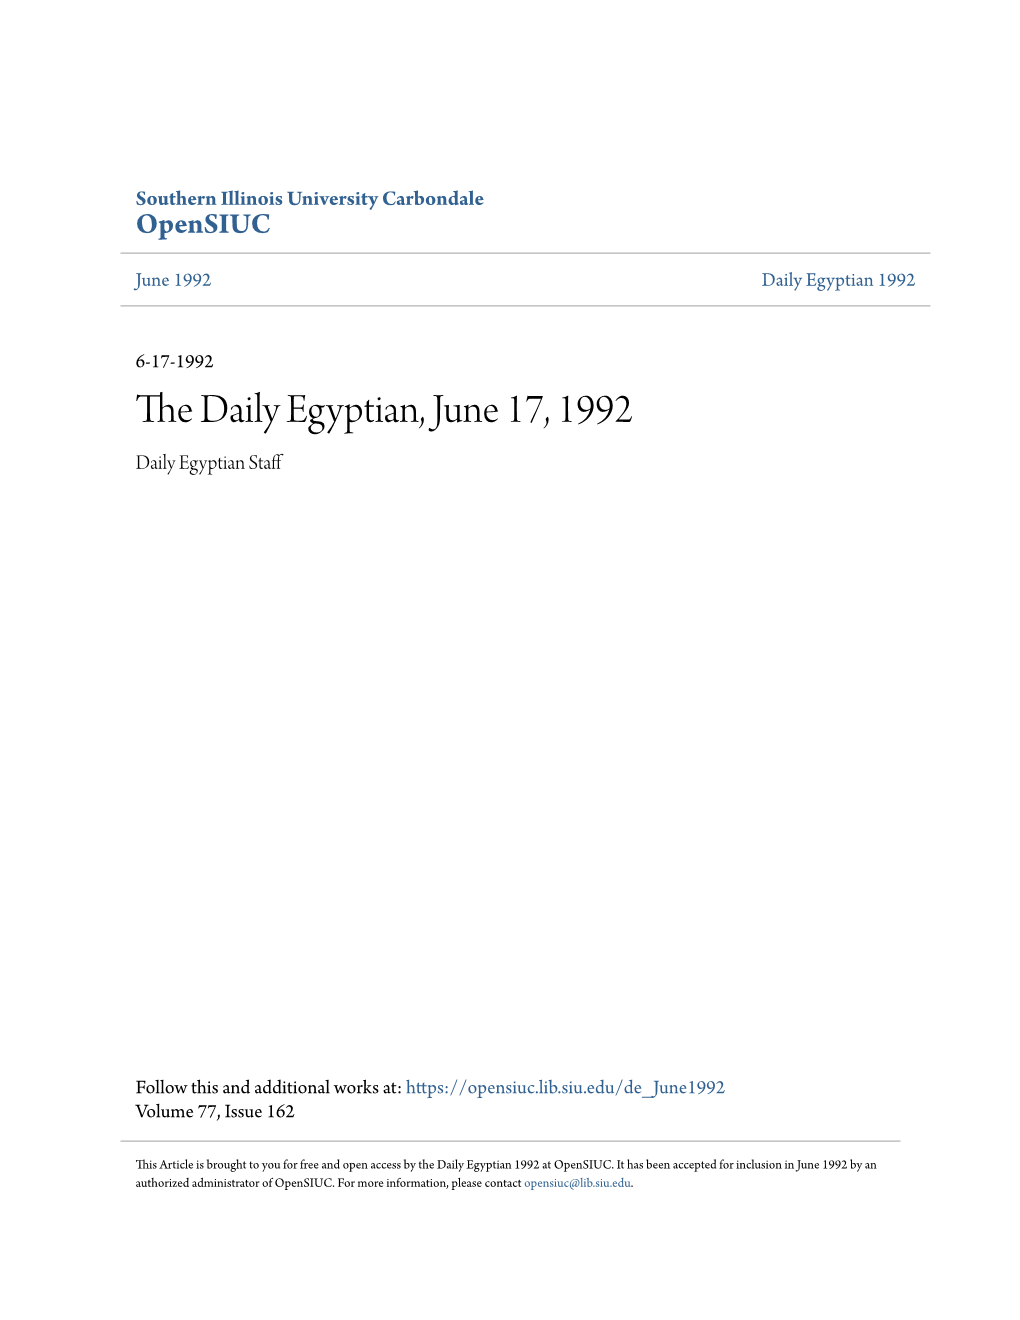 The Daily Egyptian, June 17, 1992